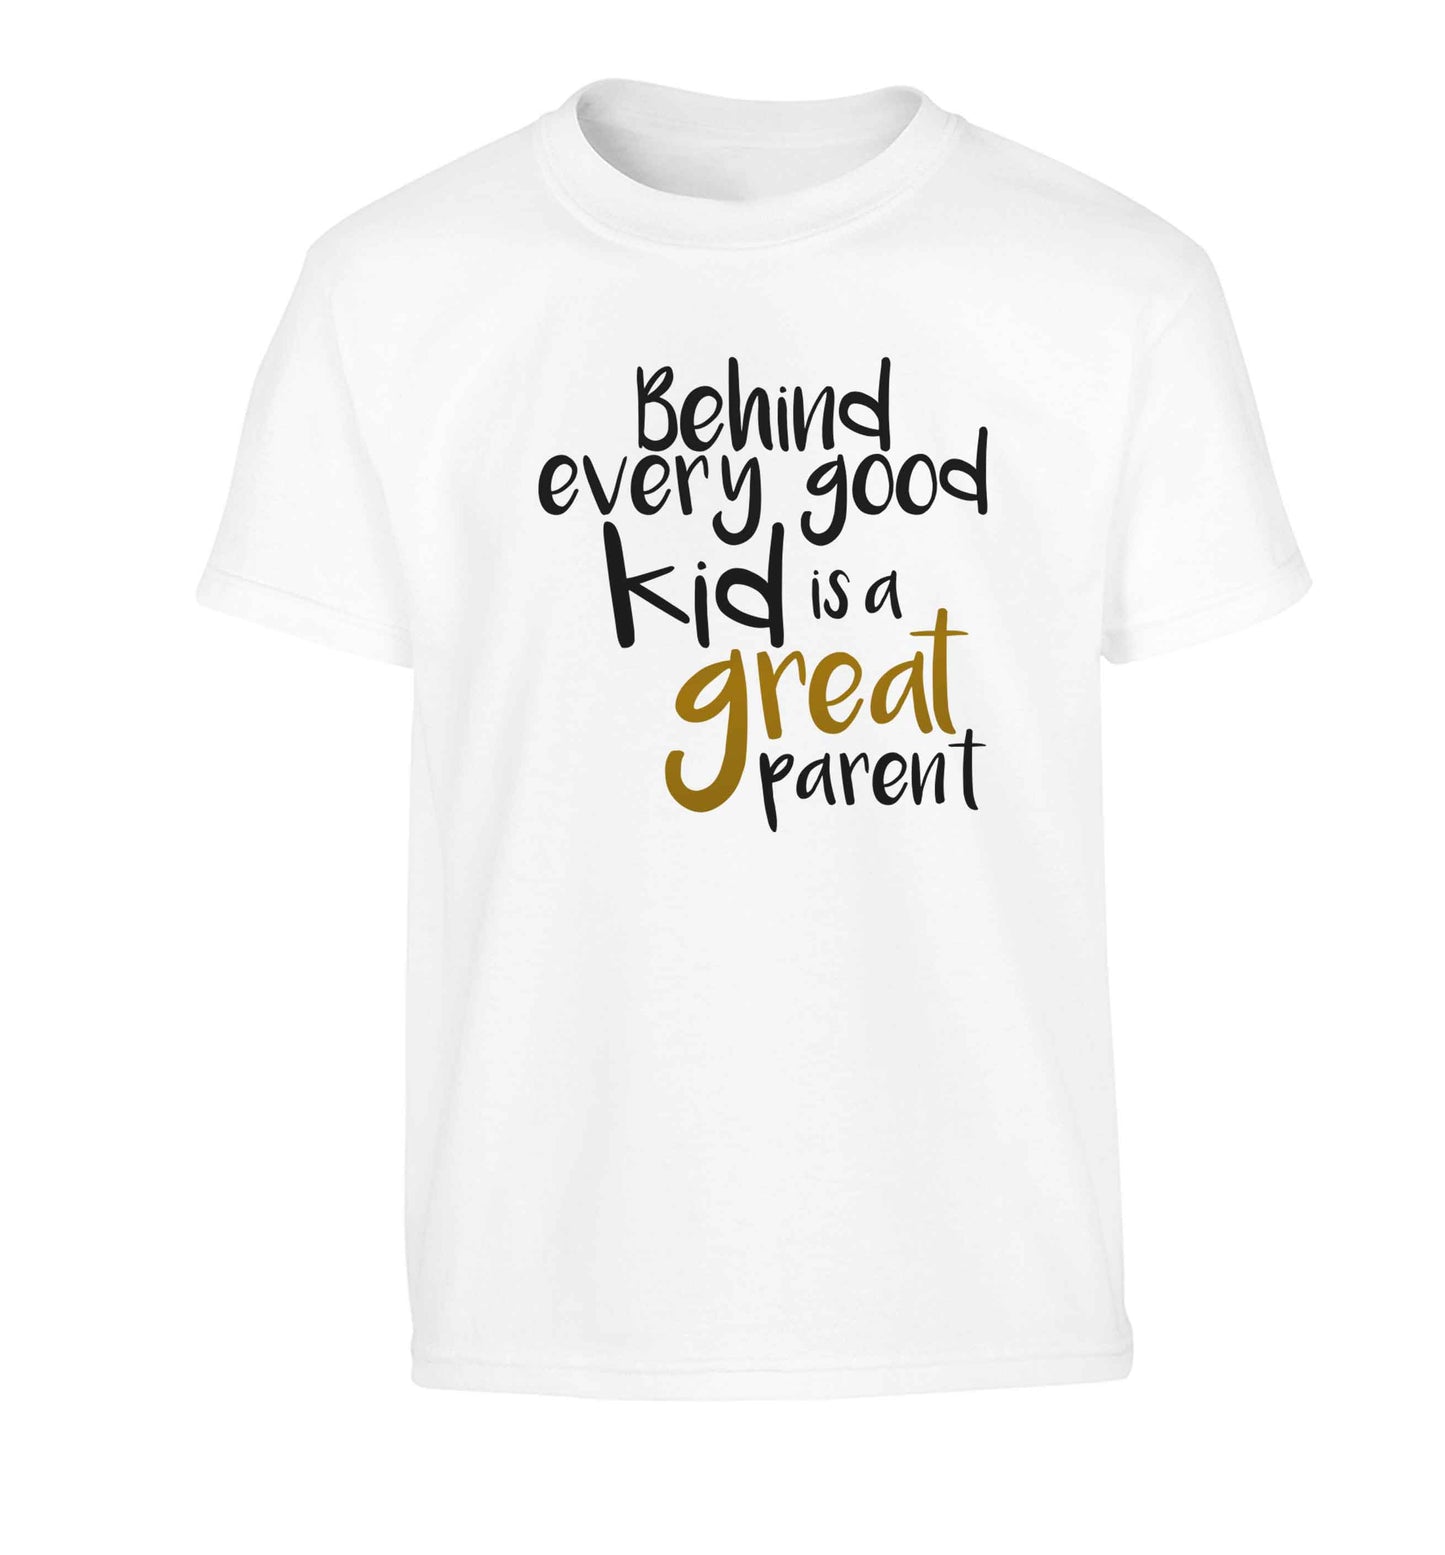 Behind every good kid is a great parent Children's white Tshirt 12-13 Years